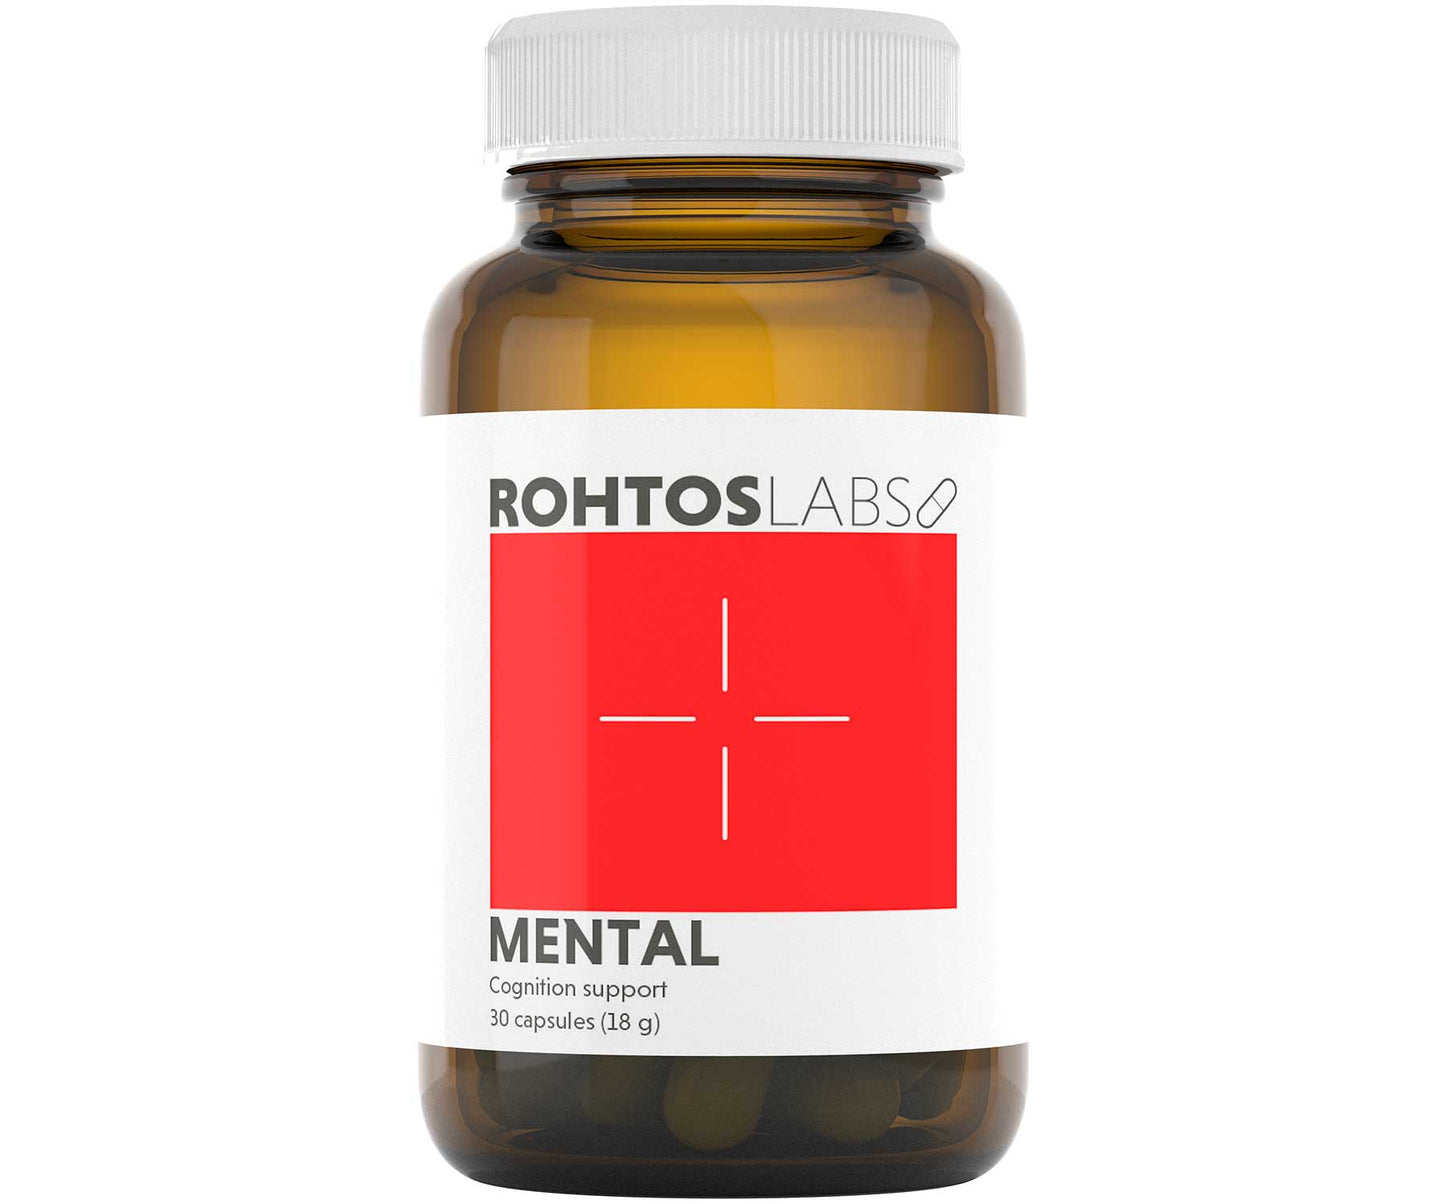 Mental by Rohtos Labs contains a harmonic blend of seven powerful nootropics and adaptogens. Focus booster supplement. Arctic Biotools - Made in Finland